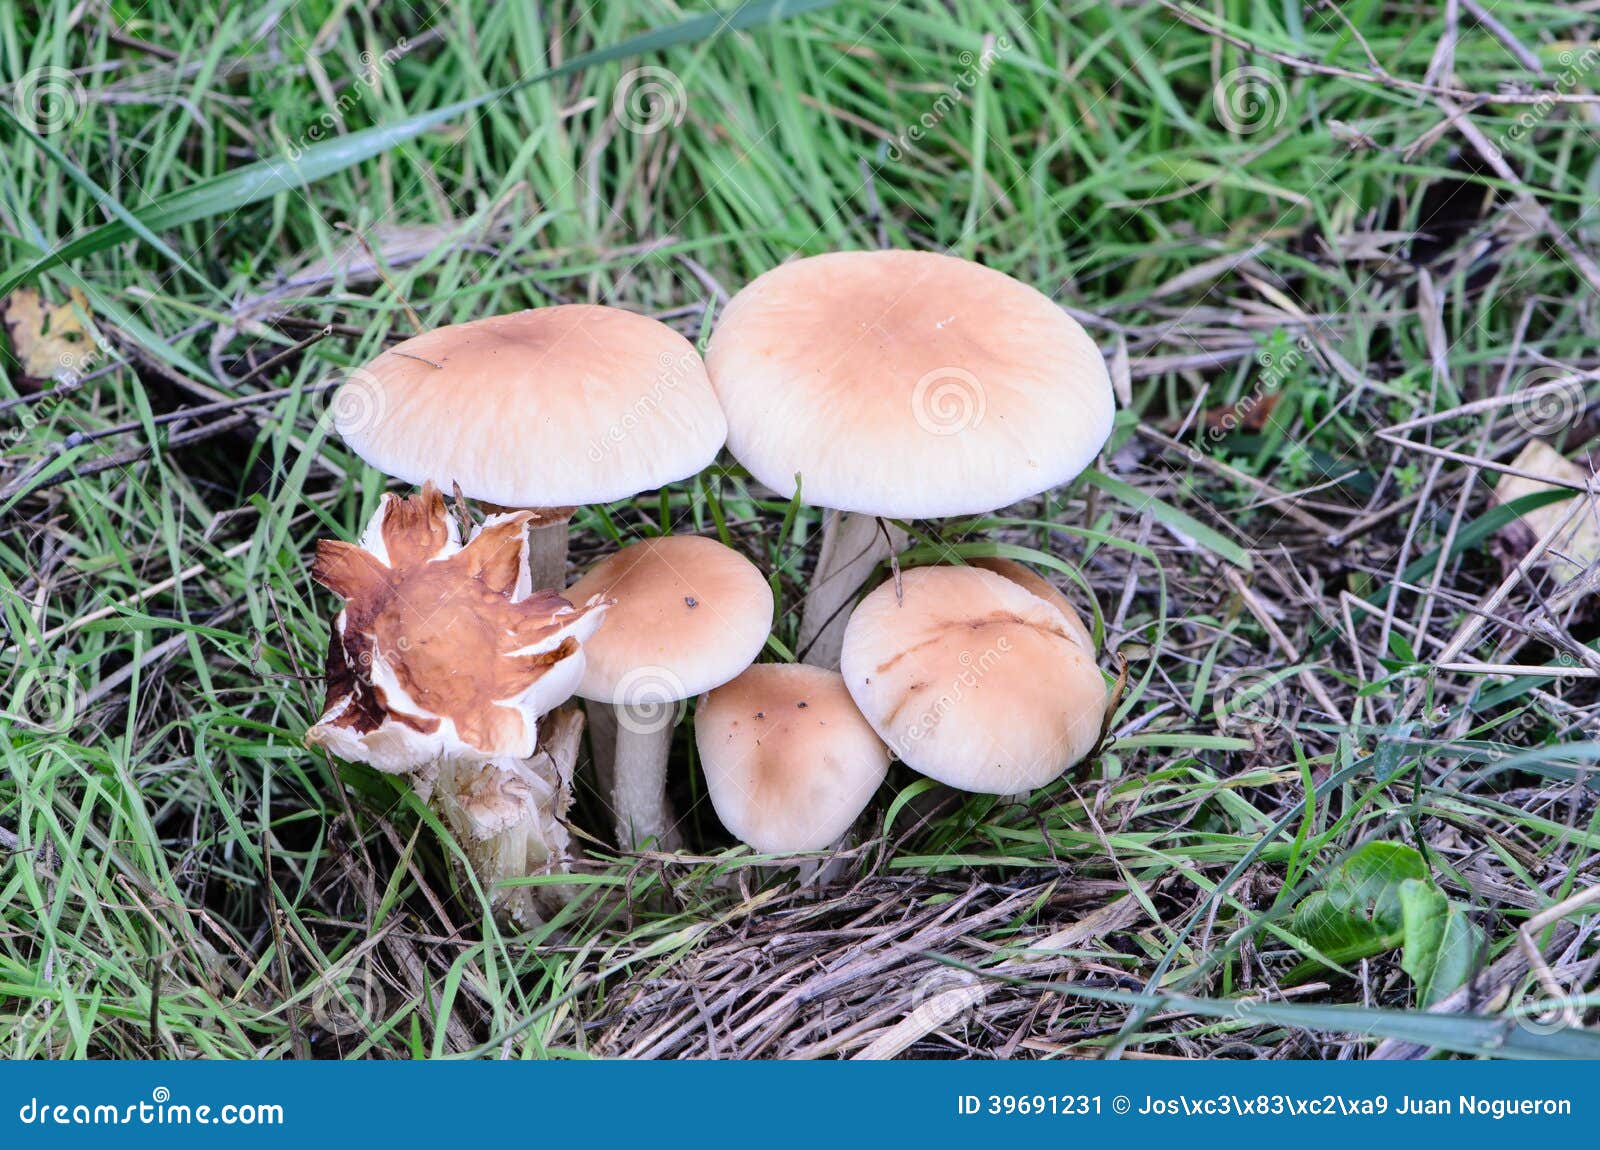 five mushrooms equal and different